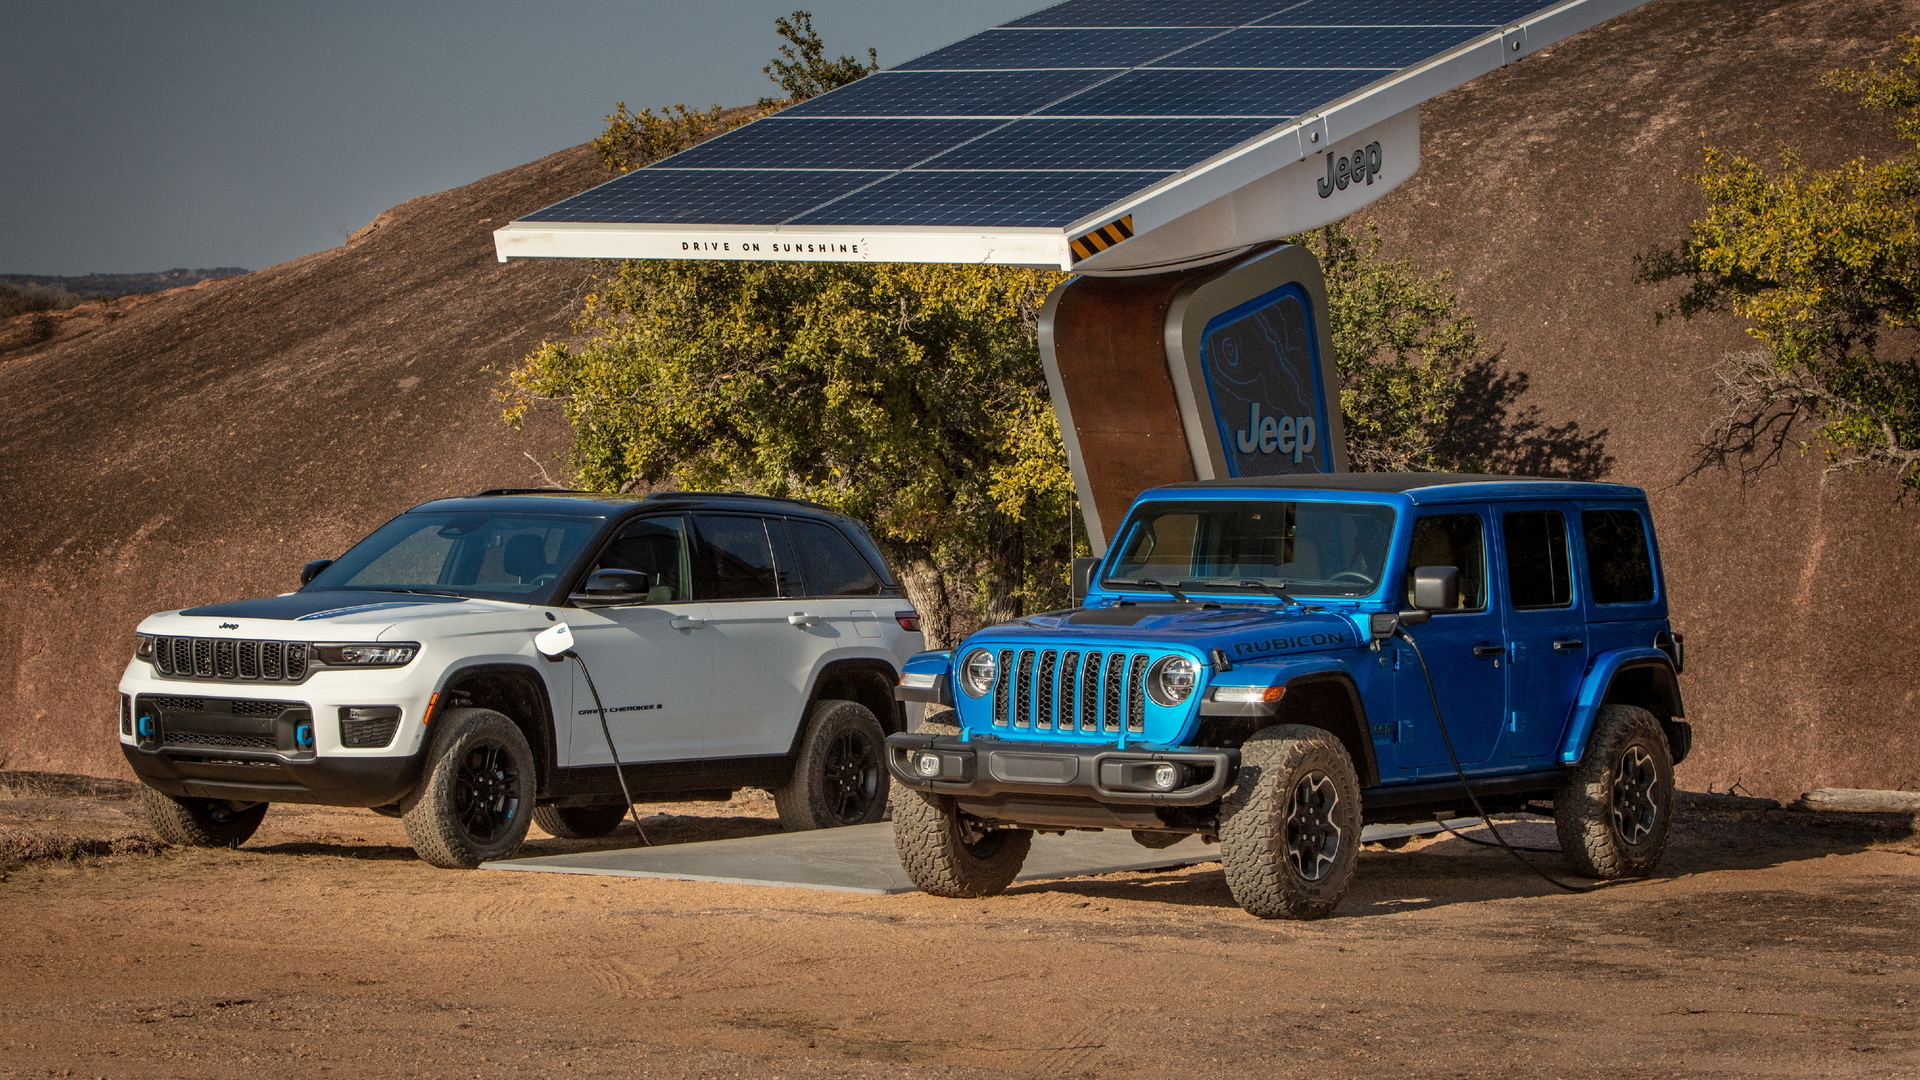 No more diesel power for Jeep Wrangler. Know the reason